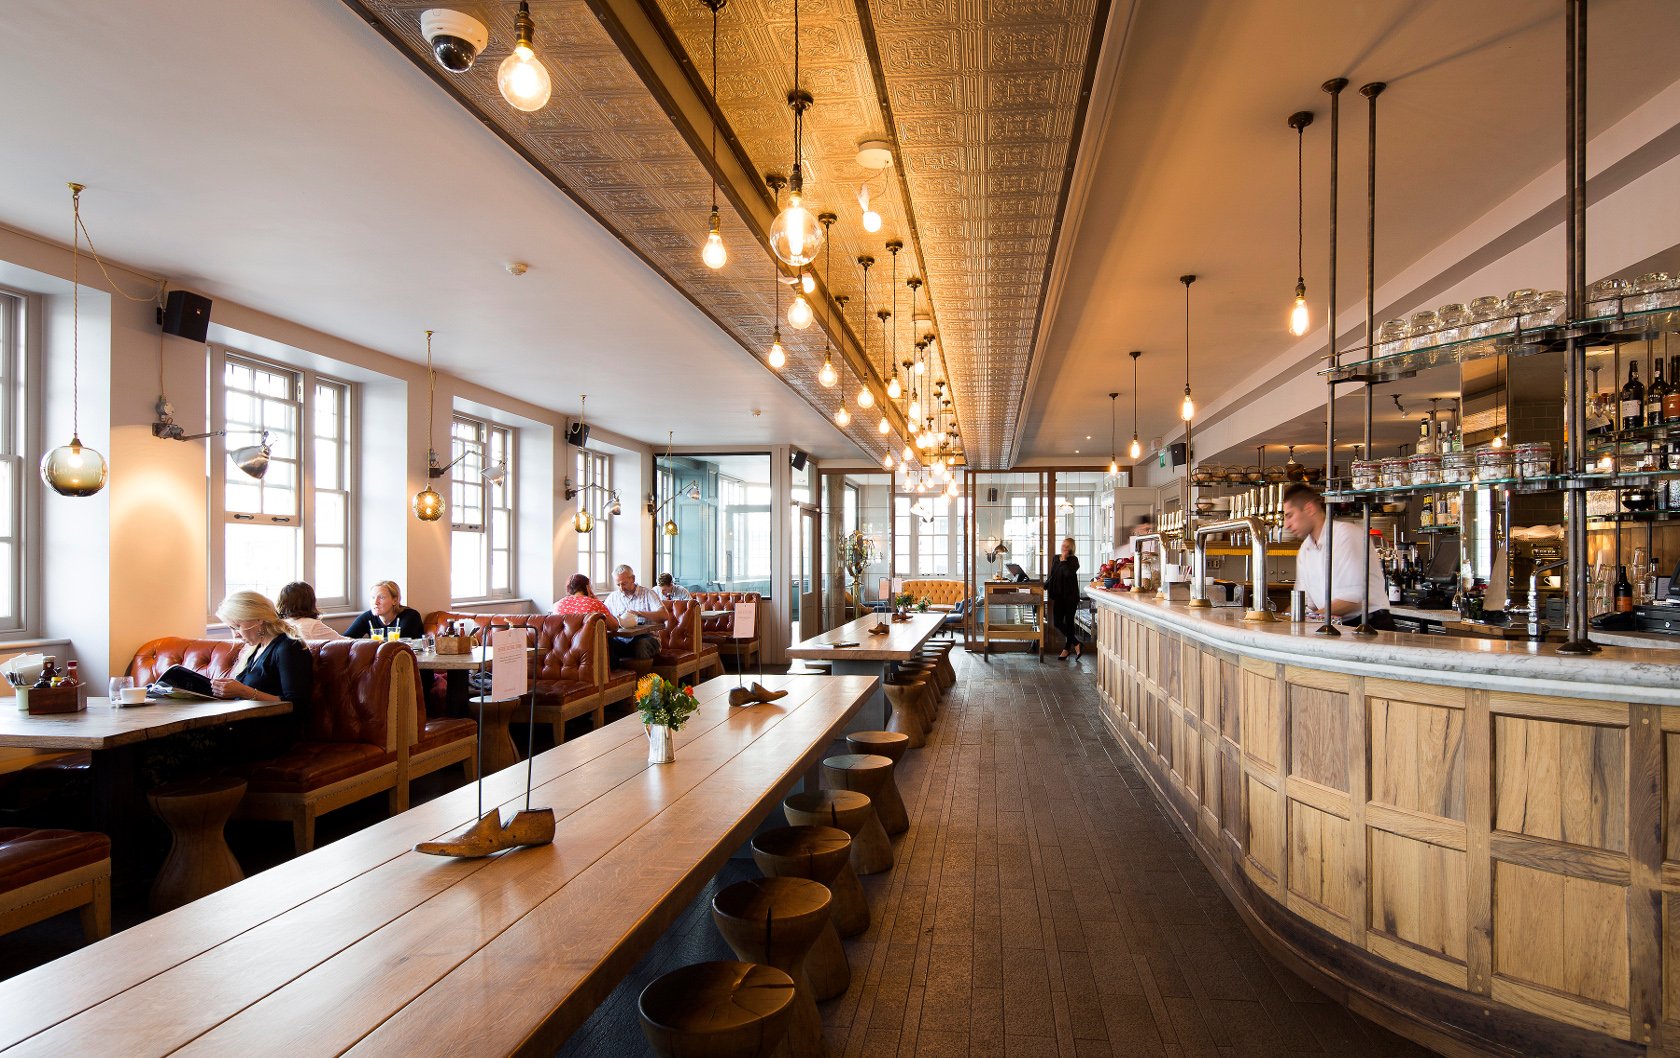 Top 10 Pre-Theater Restaurants In London - London Perfect